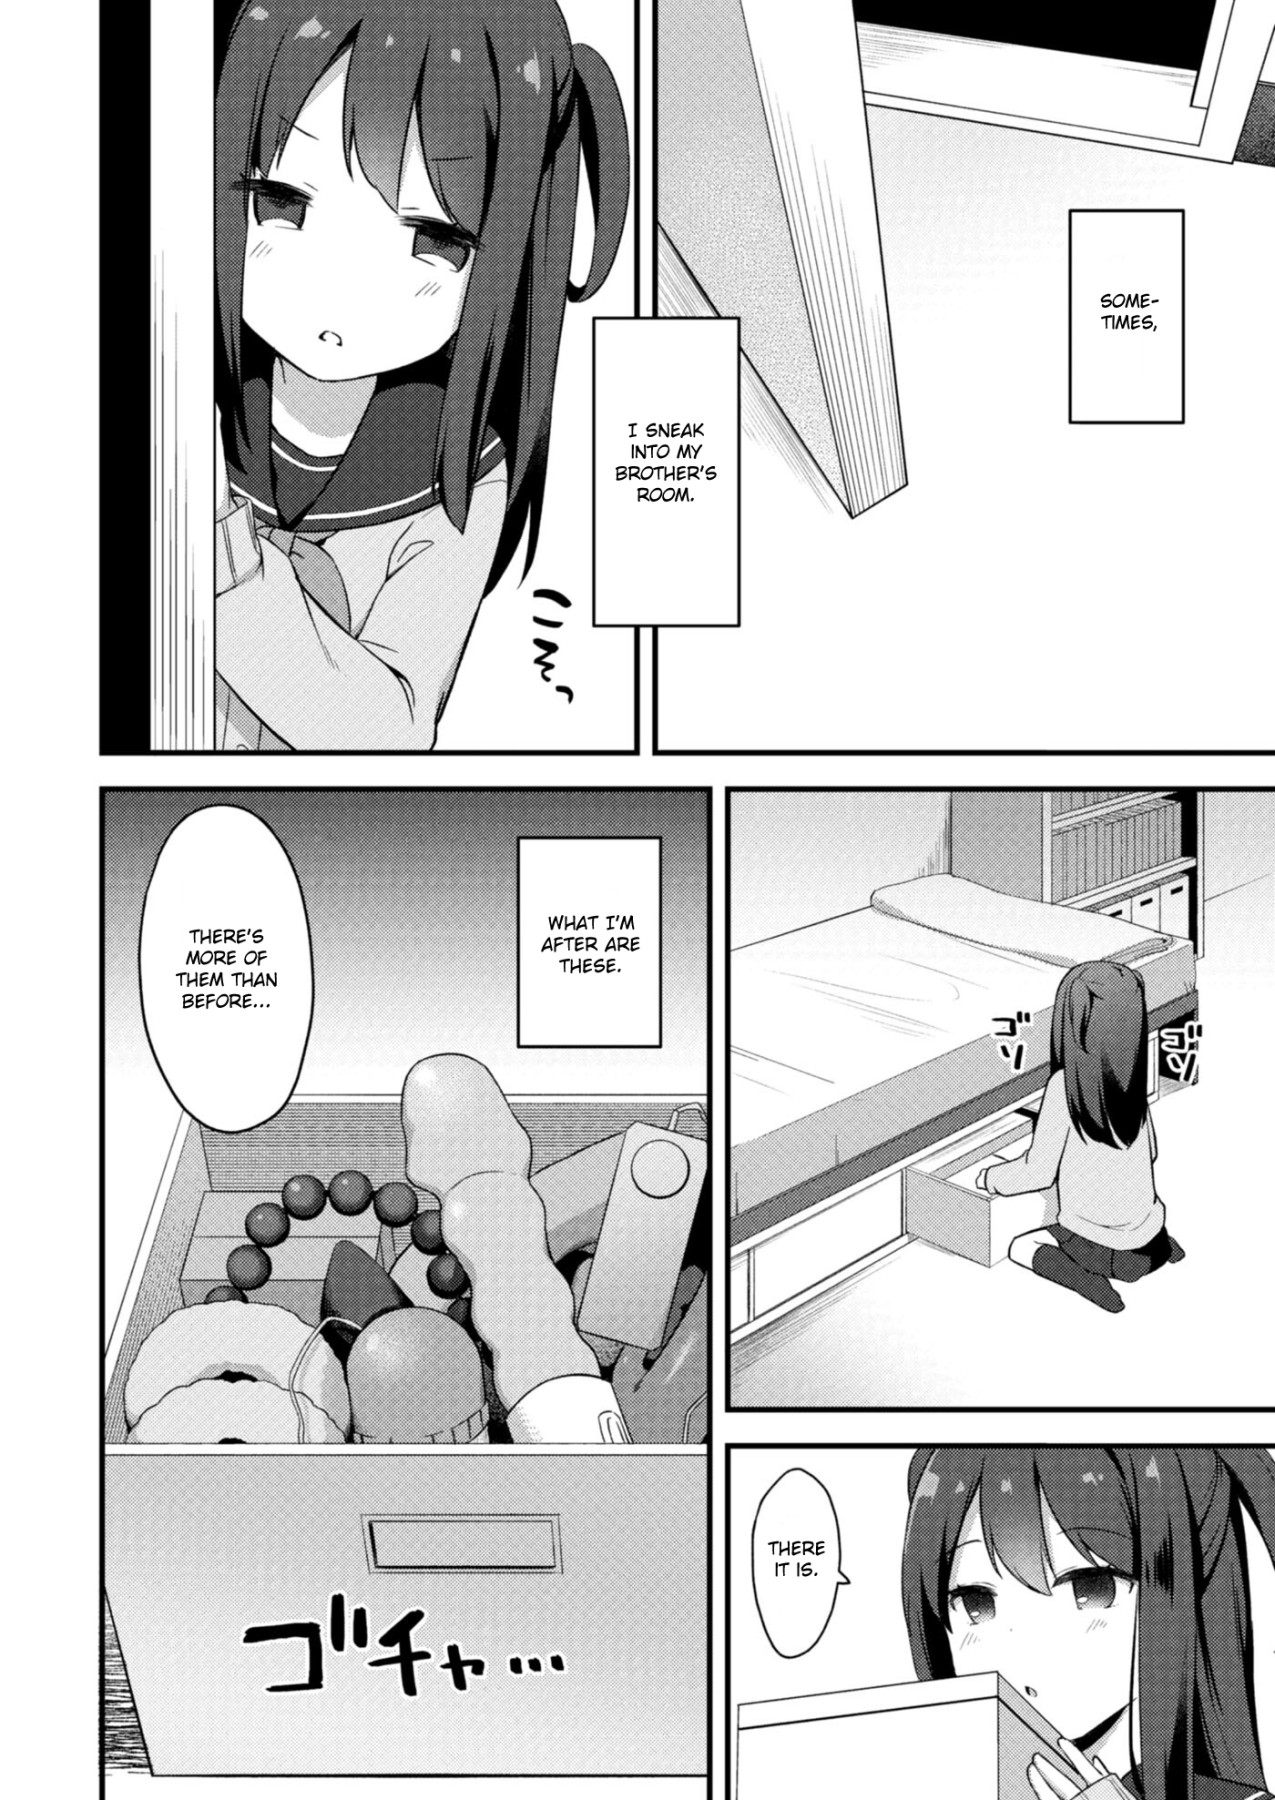 Hentai Manga Comic-Little Sister Temptation #3 Playing with Toys-Read-2